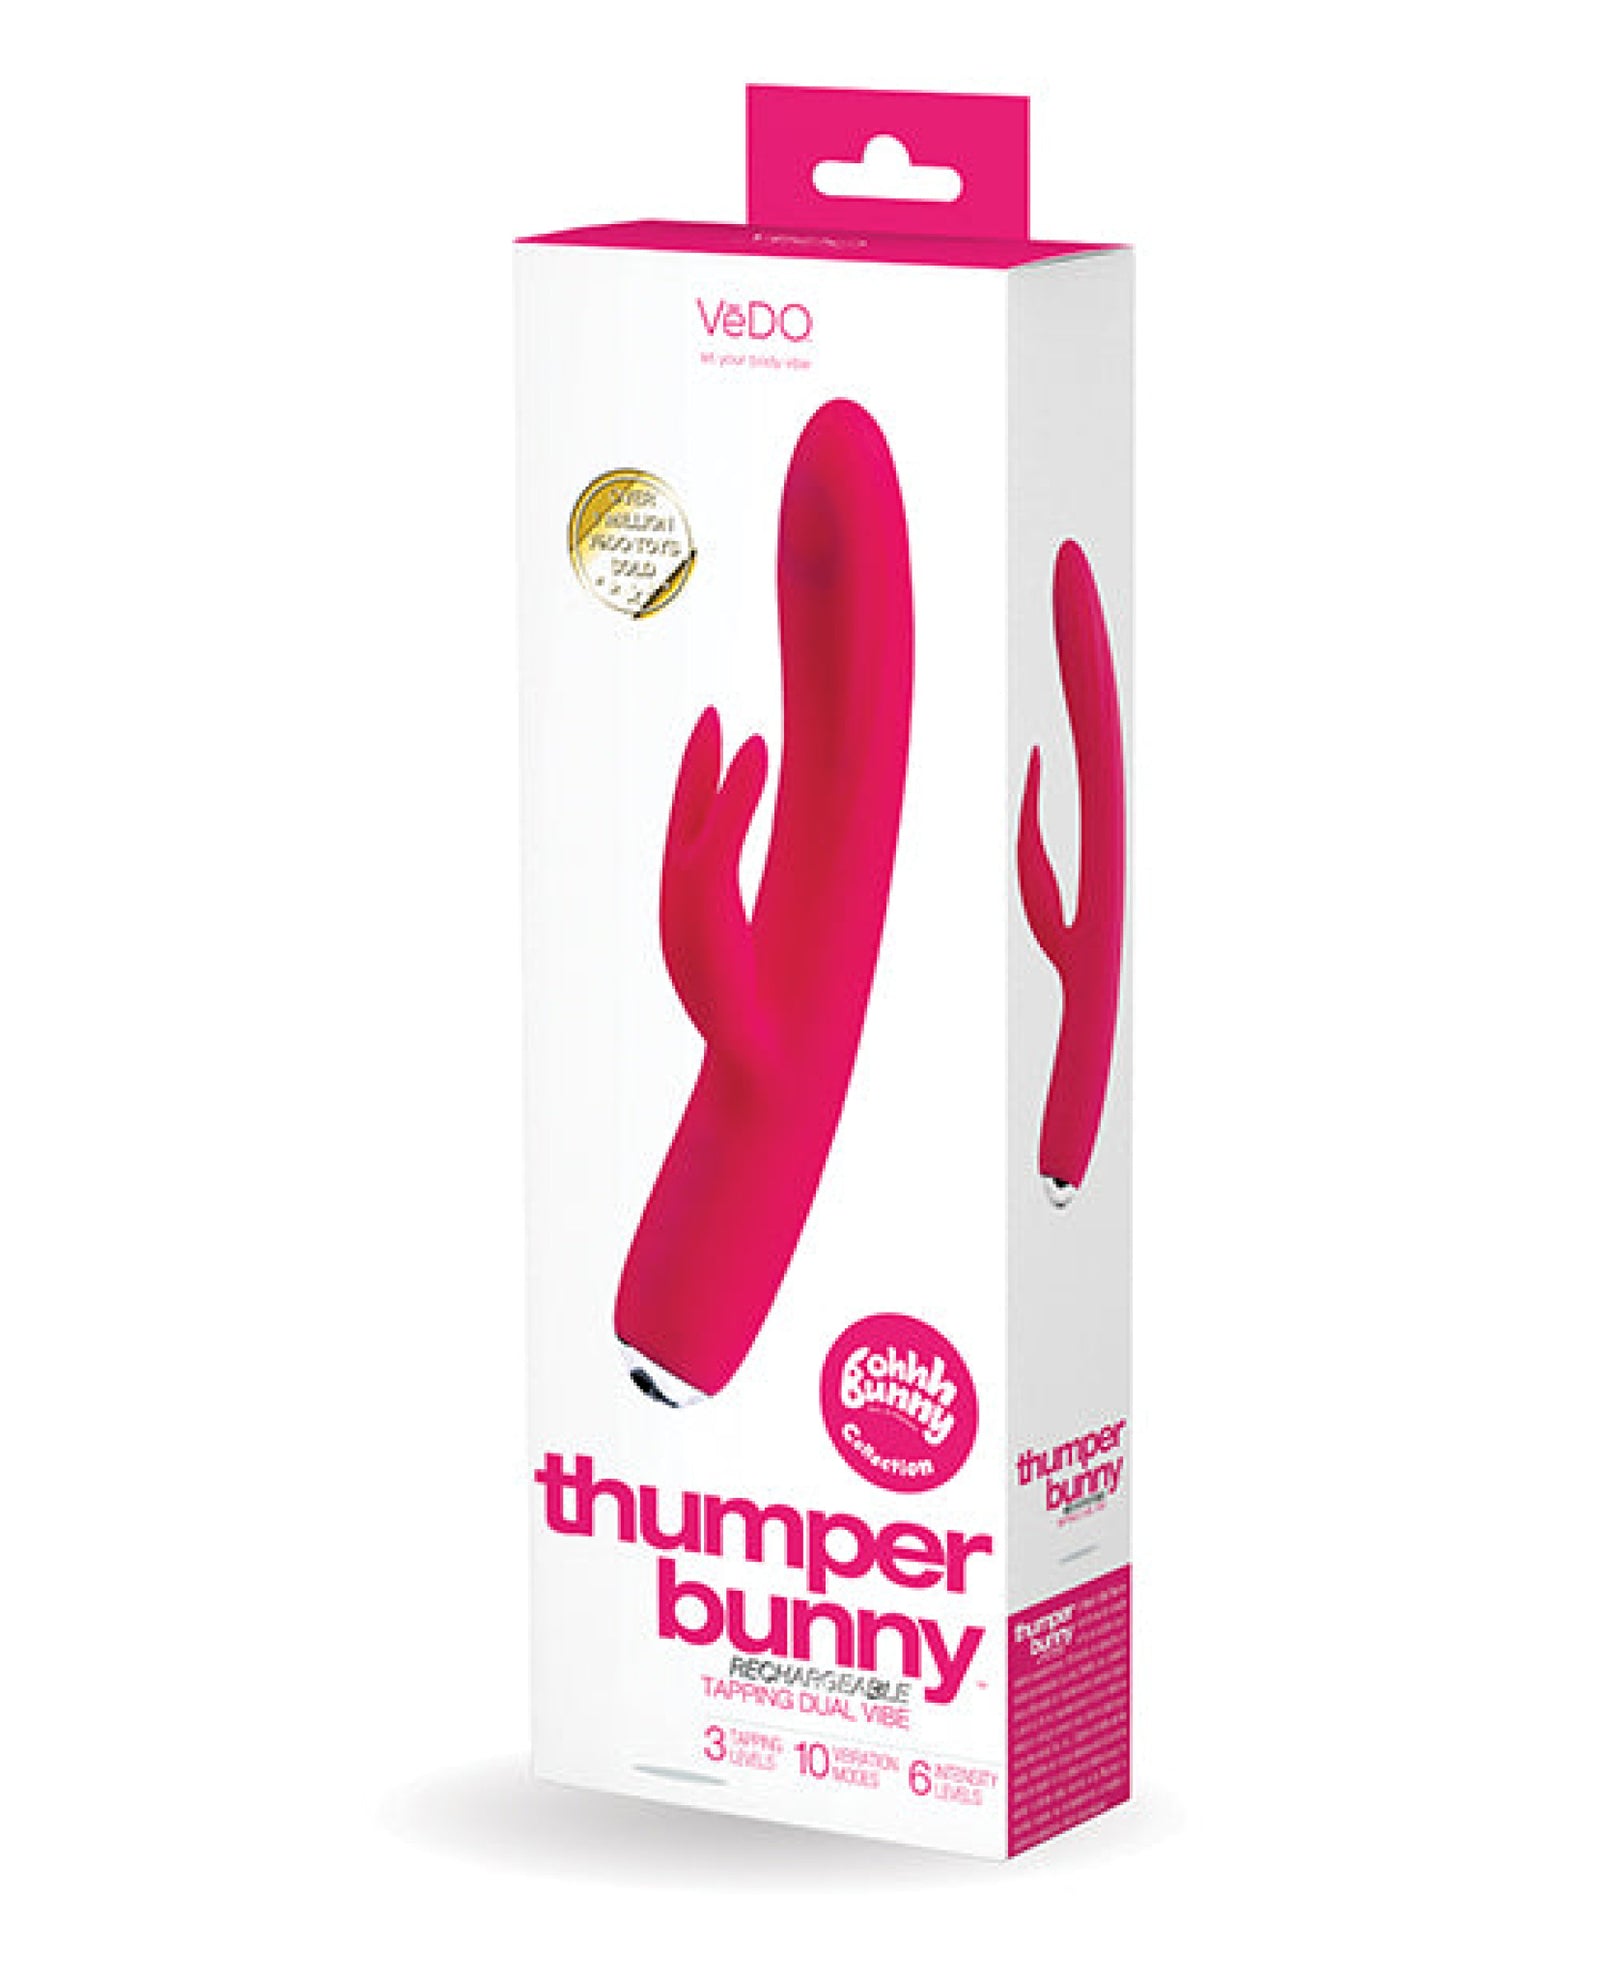 Vedo Thumper Bunny Rechargeable Dual Vibe VēDO